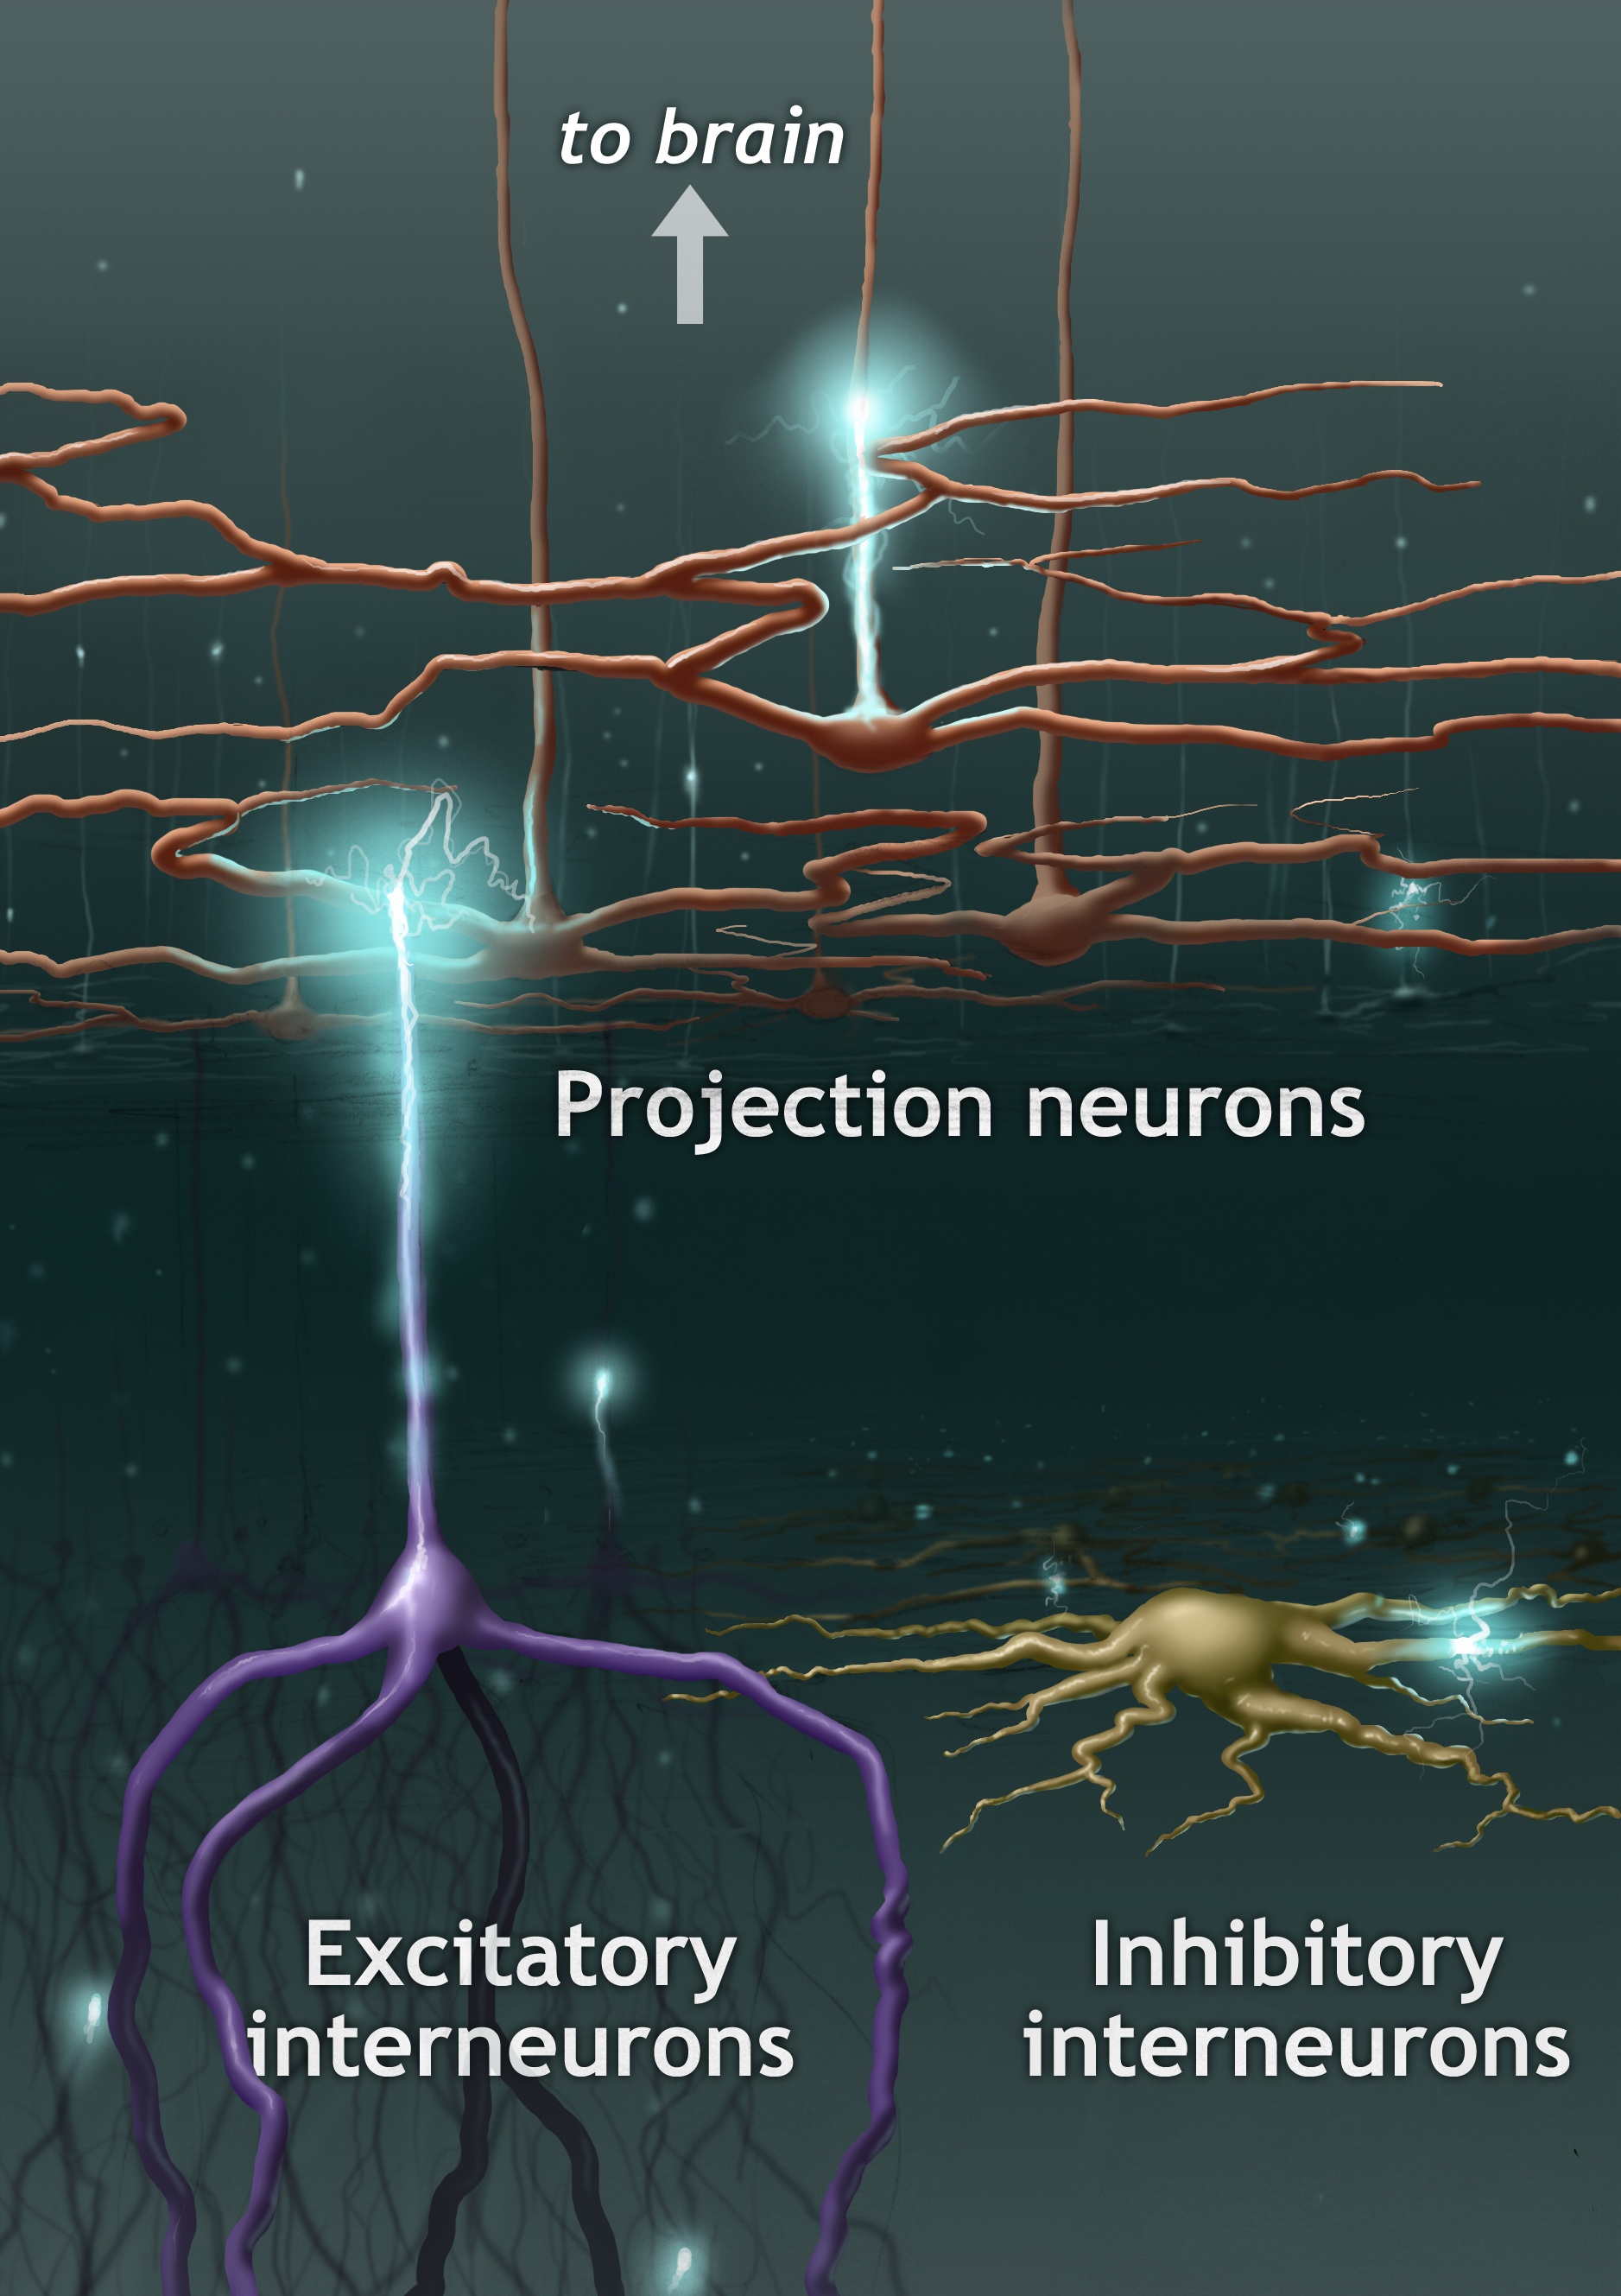 Illustration of neurons and the brain